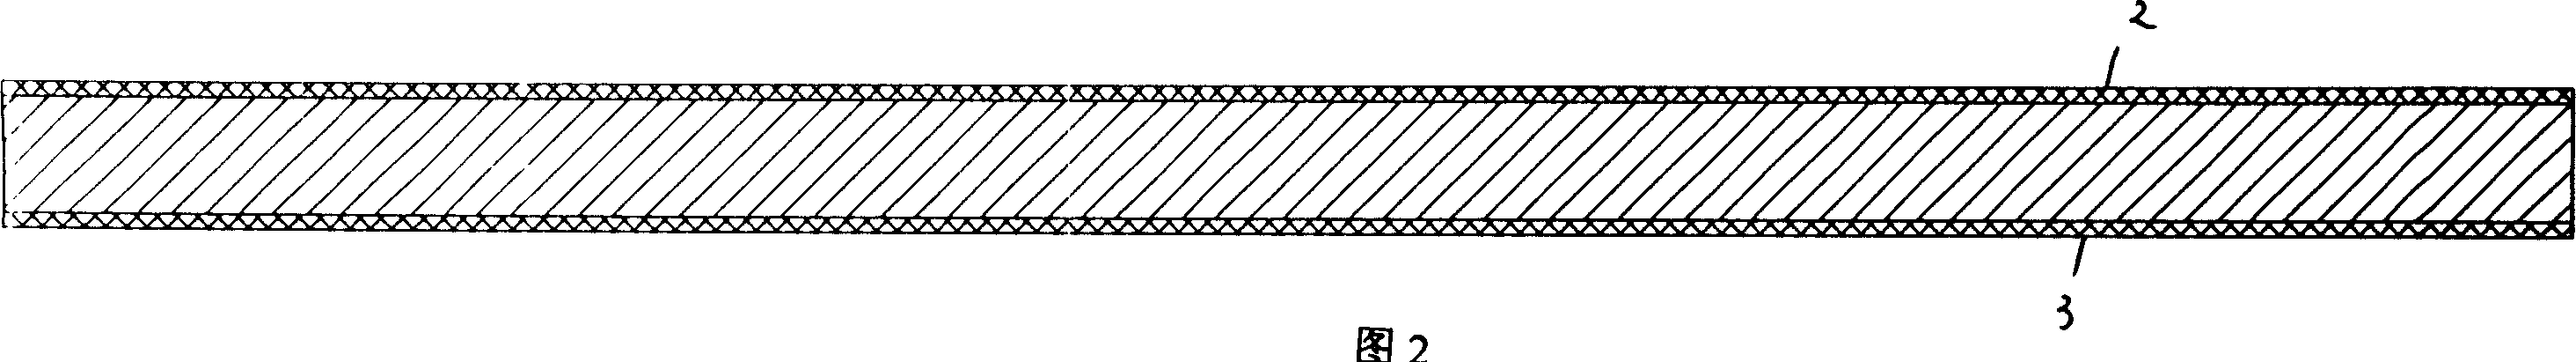 Plane button type packing technology of integrated circuit or discrete component and its packing structure